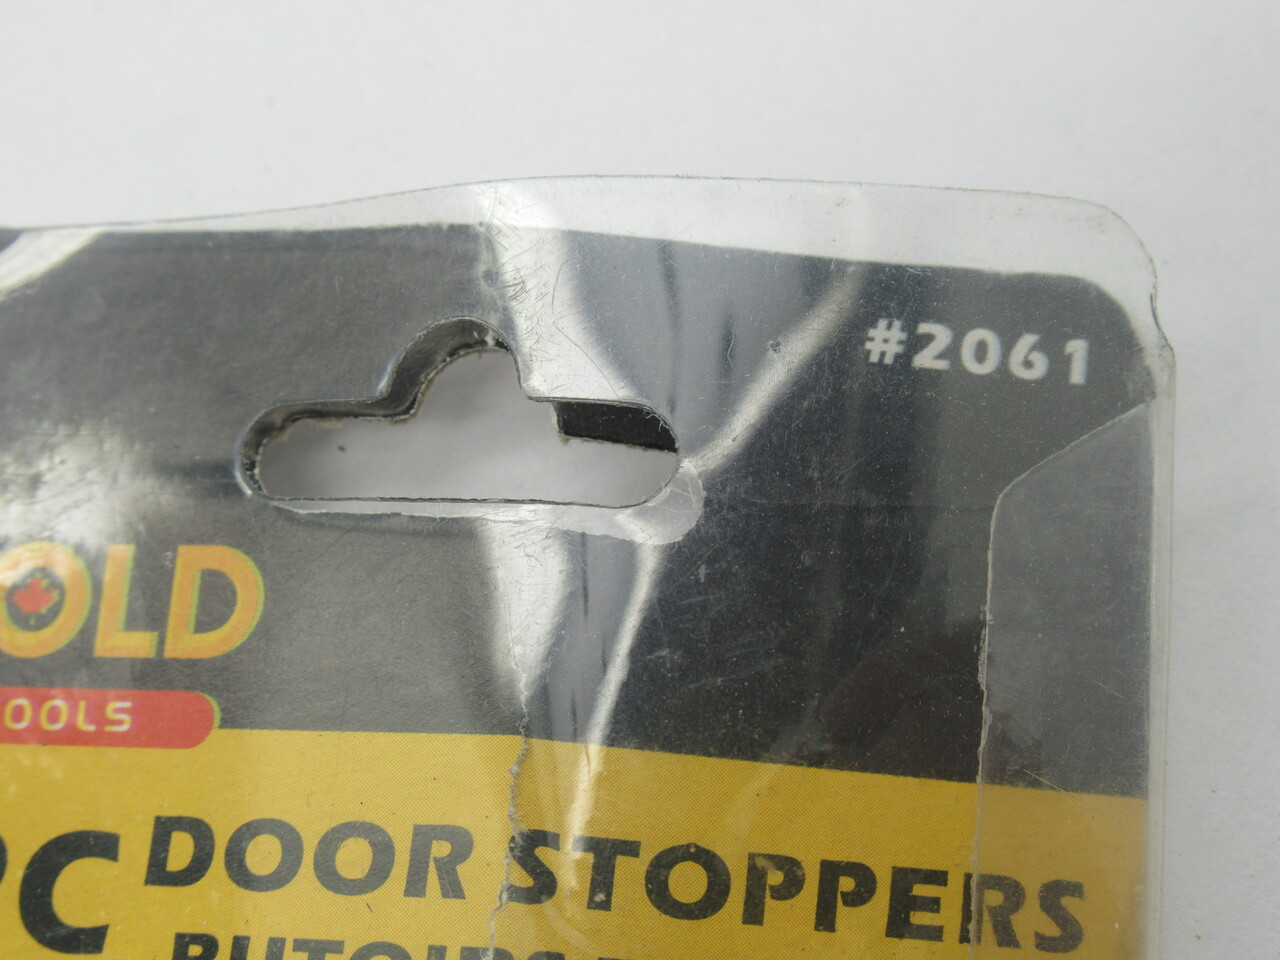 R.Z Trading 2061 Gold Tools Door Stopper *Missing 1* NEW